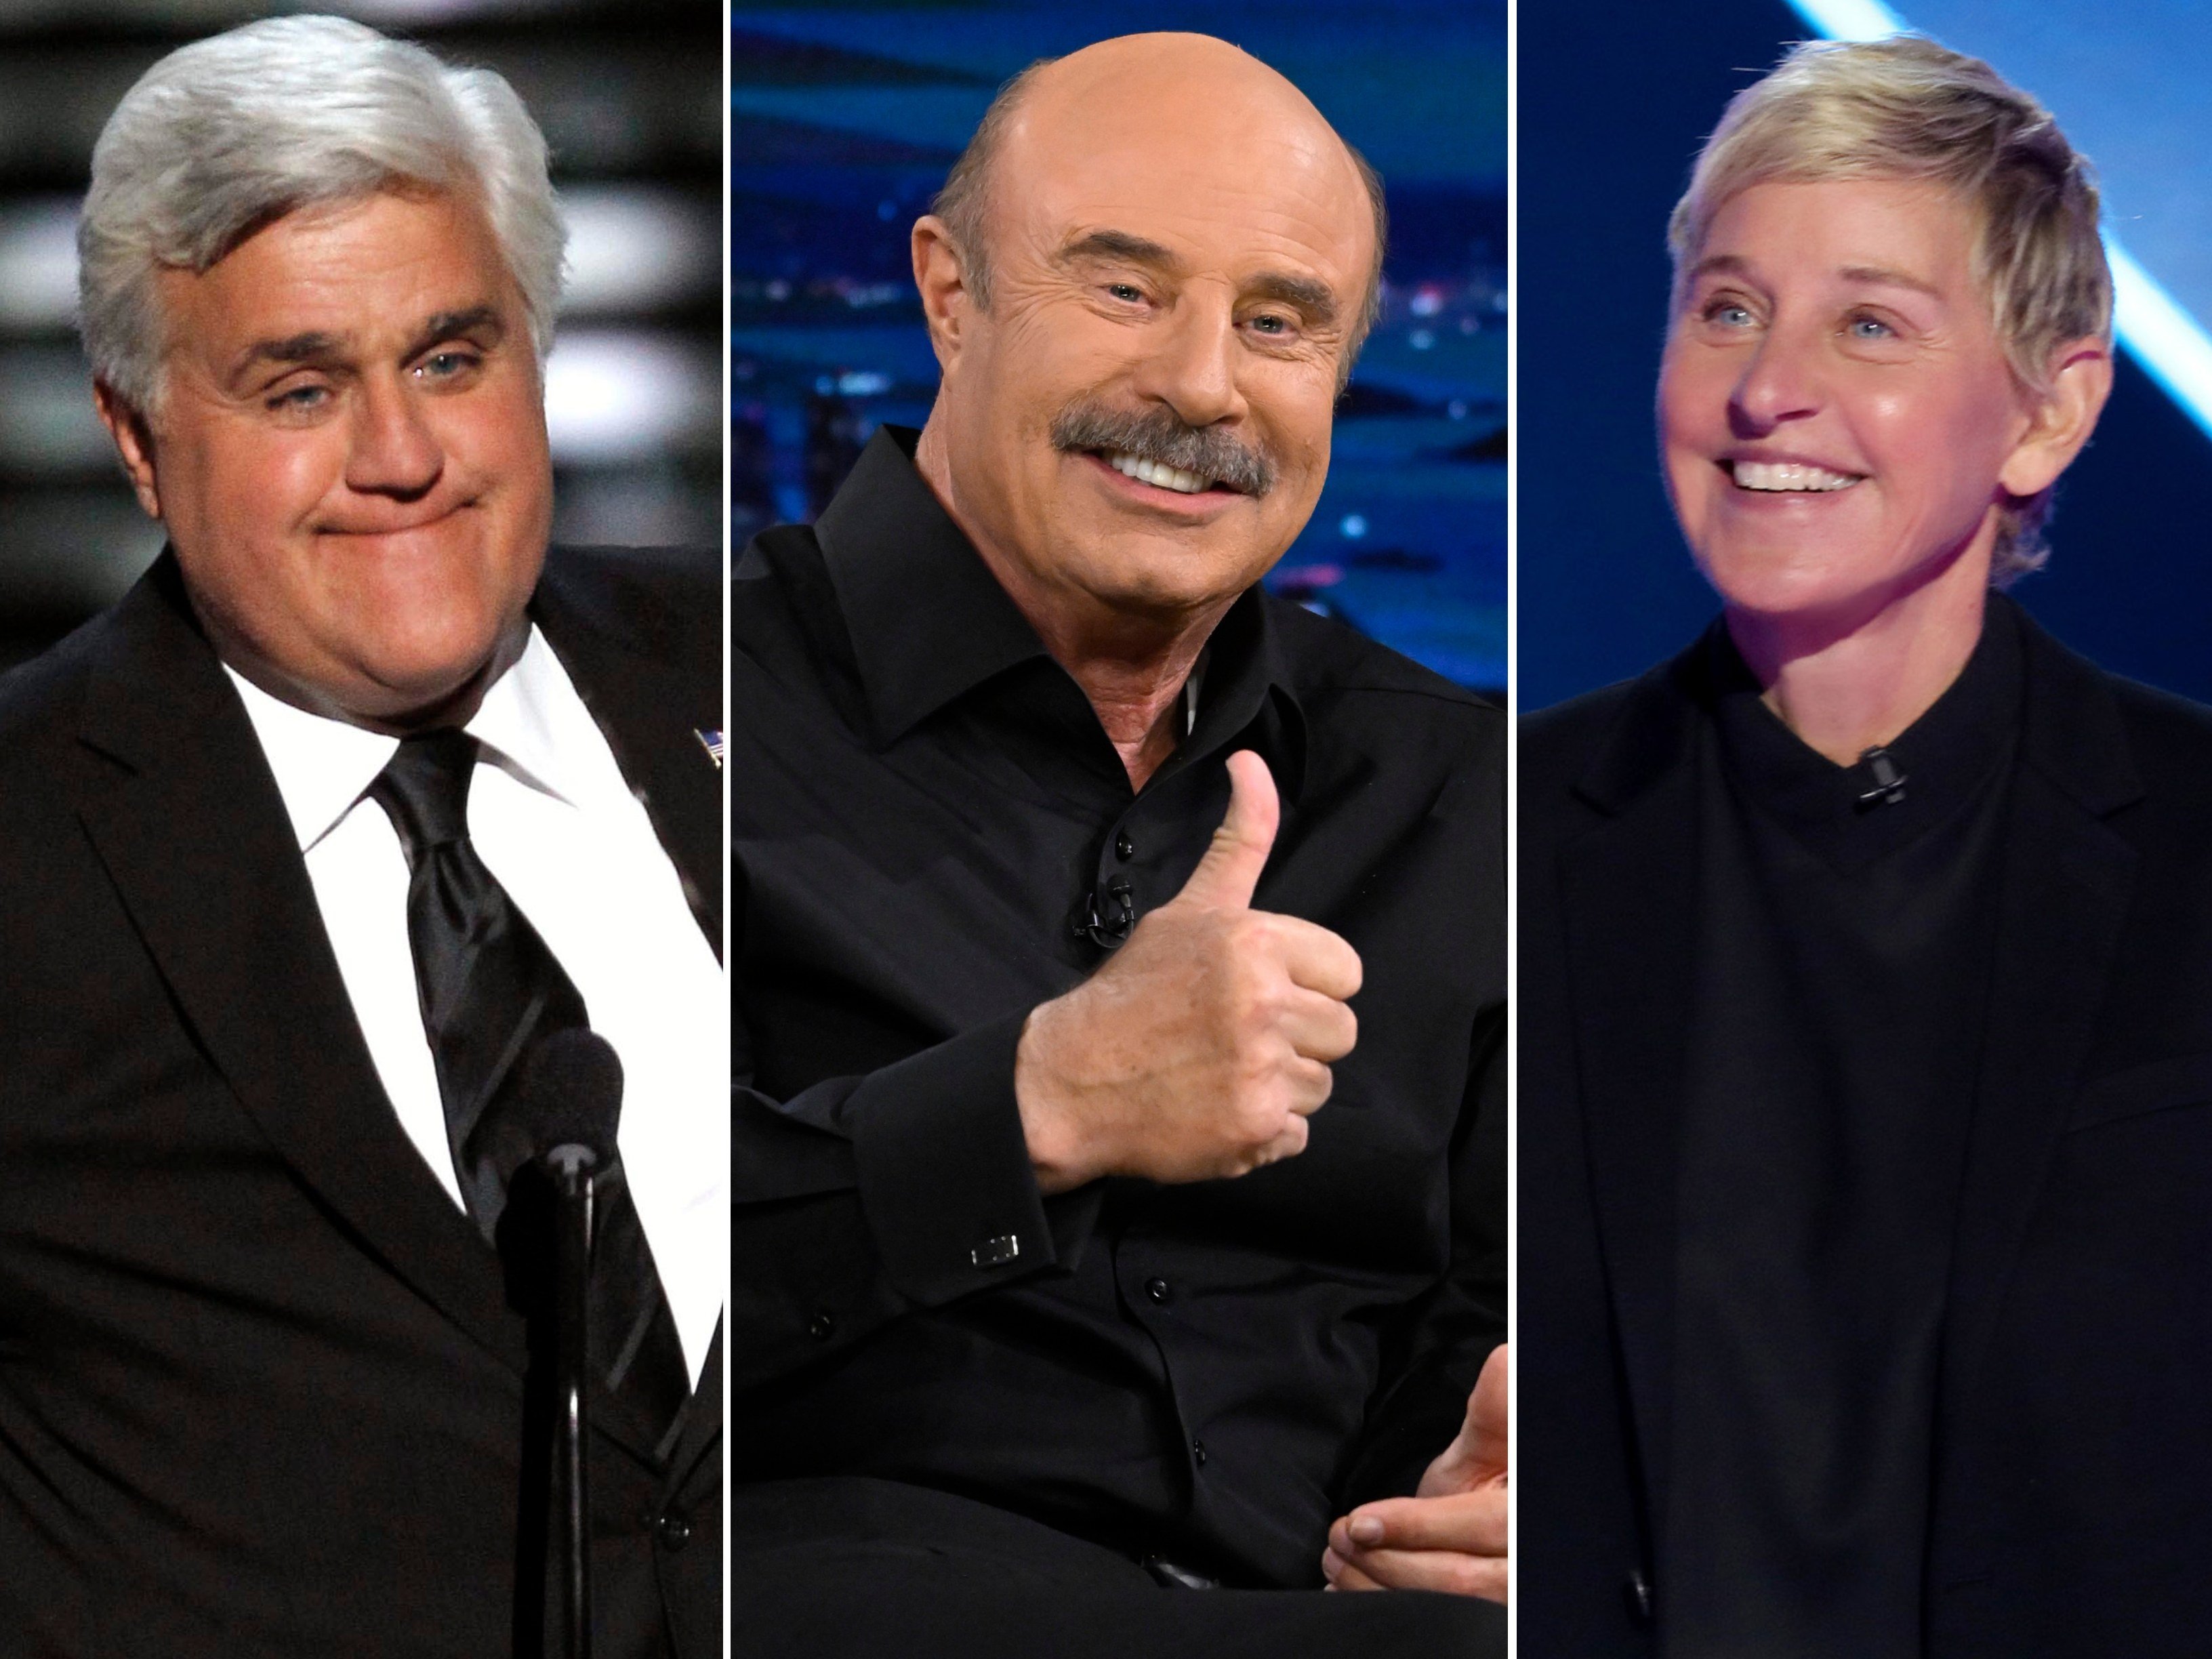 Jay Leno, Dr Phil and Ellen DeGeneres all made bank from their talk shows. Photos: Getty Images, AP